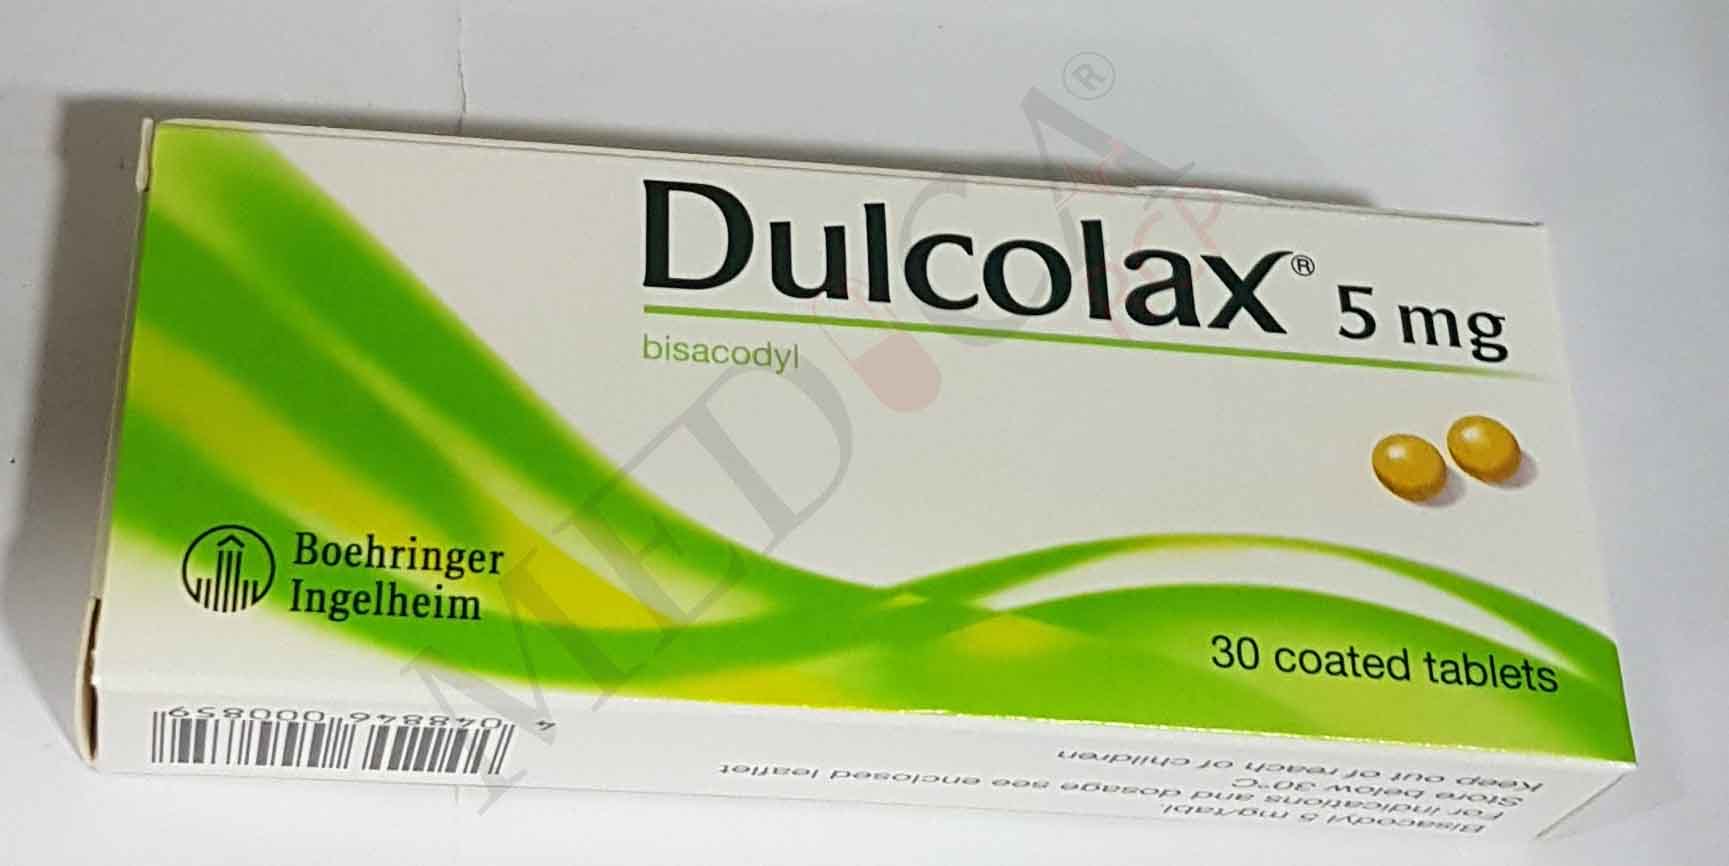 Dulcolax Tablets*